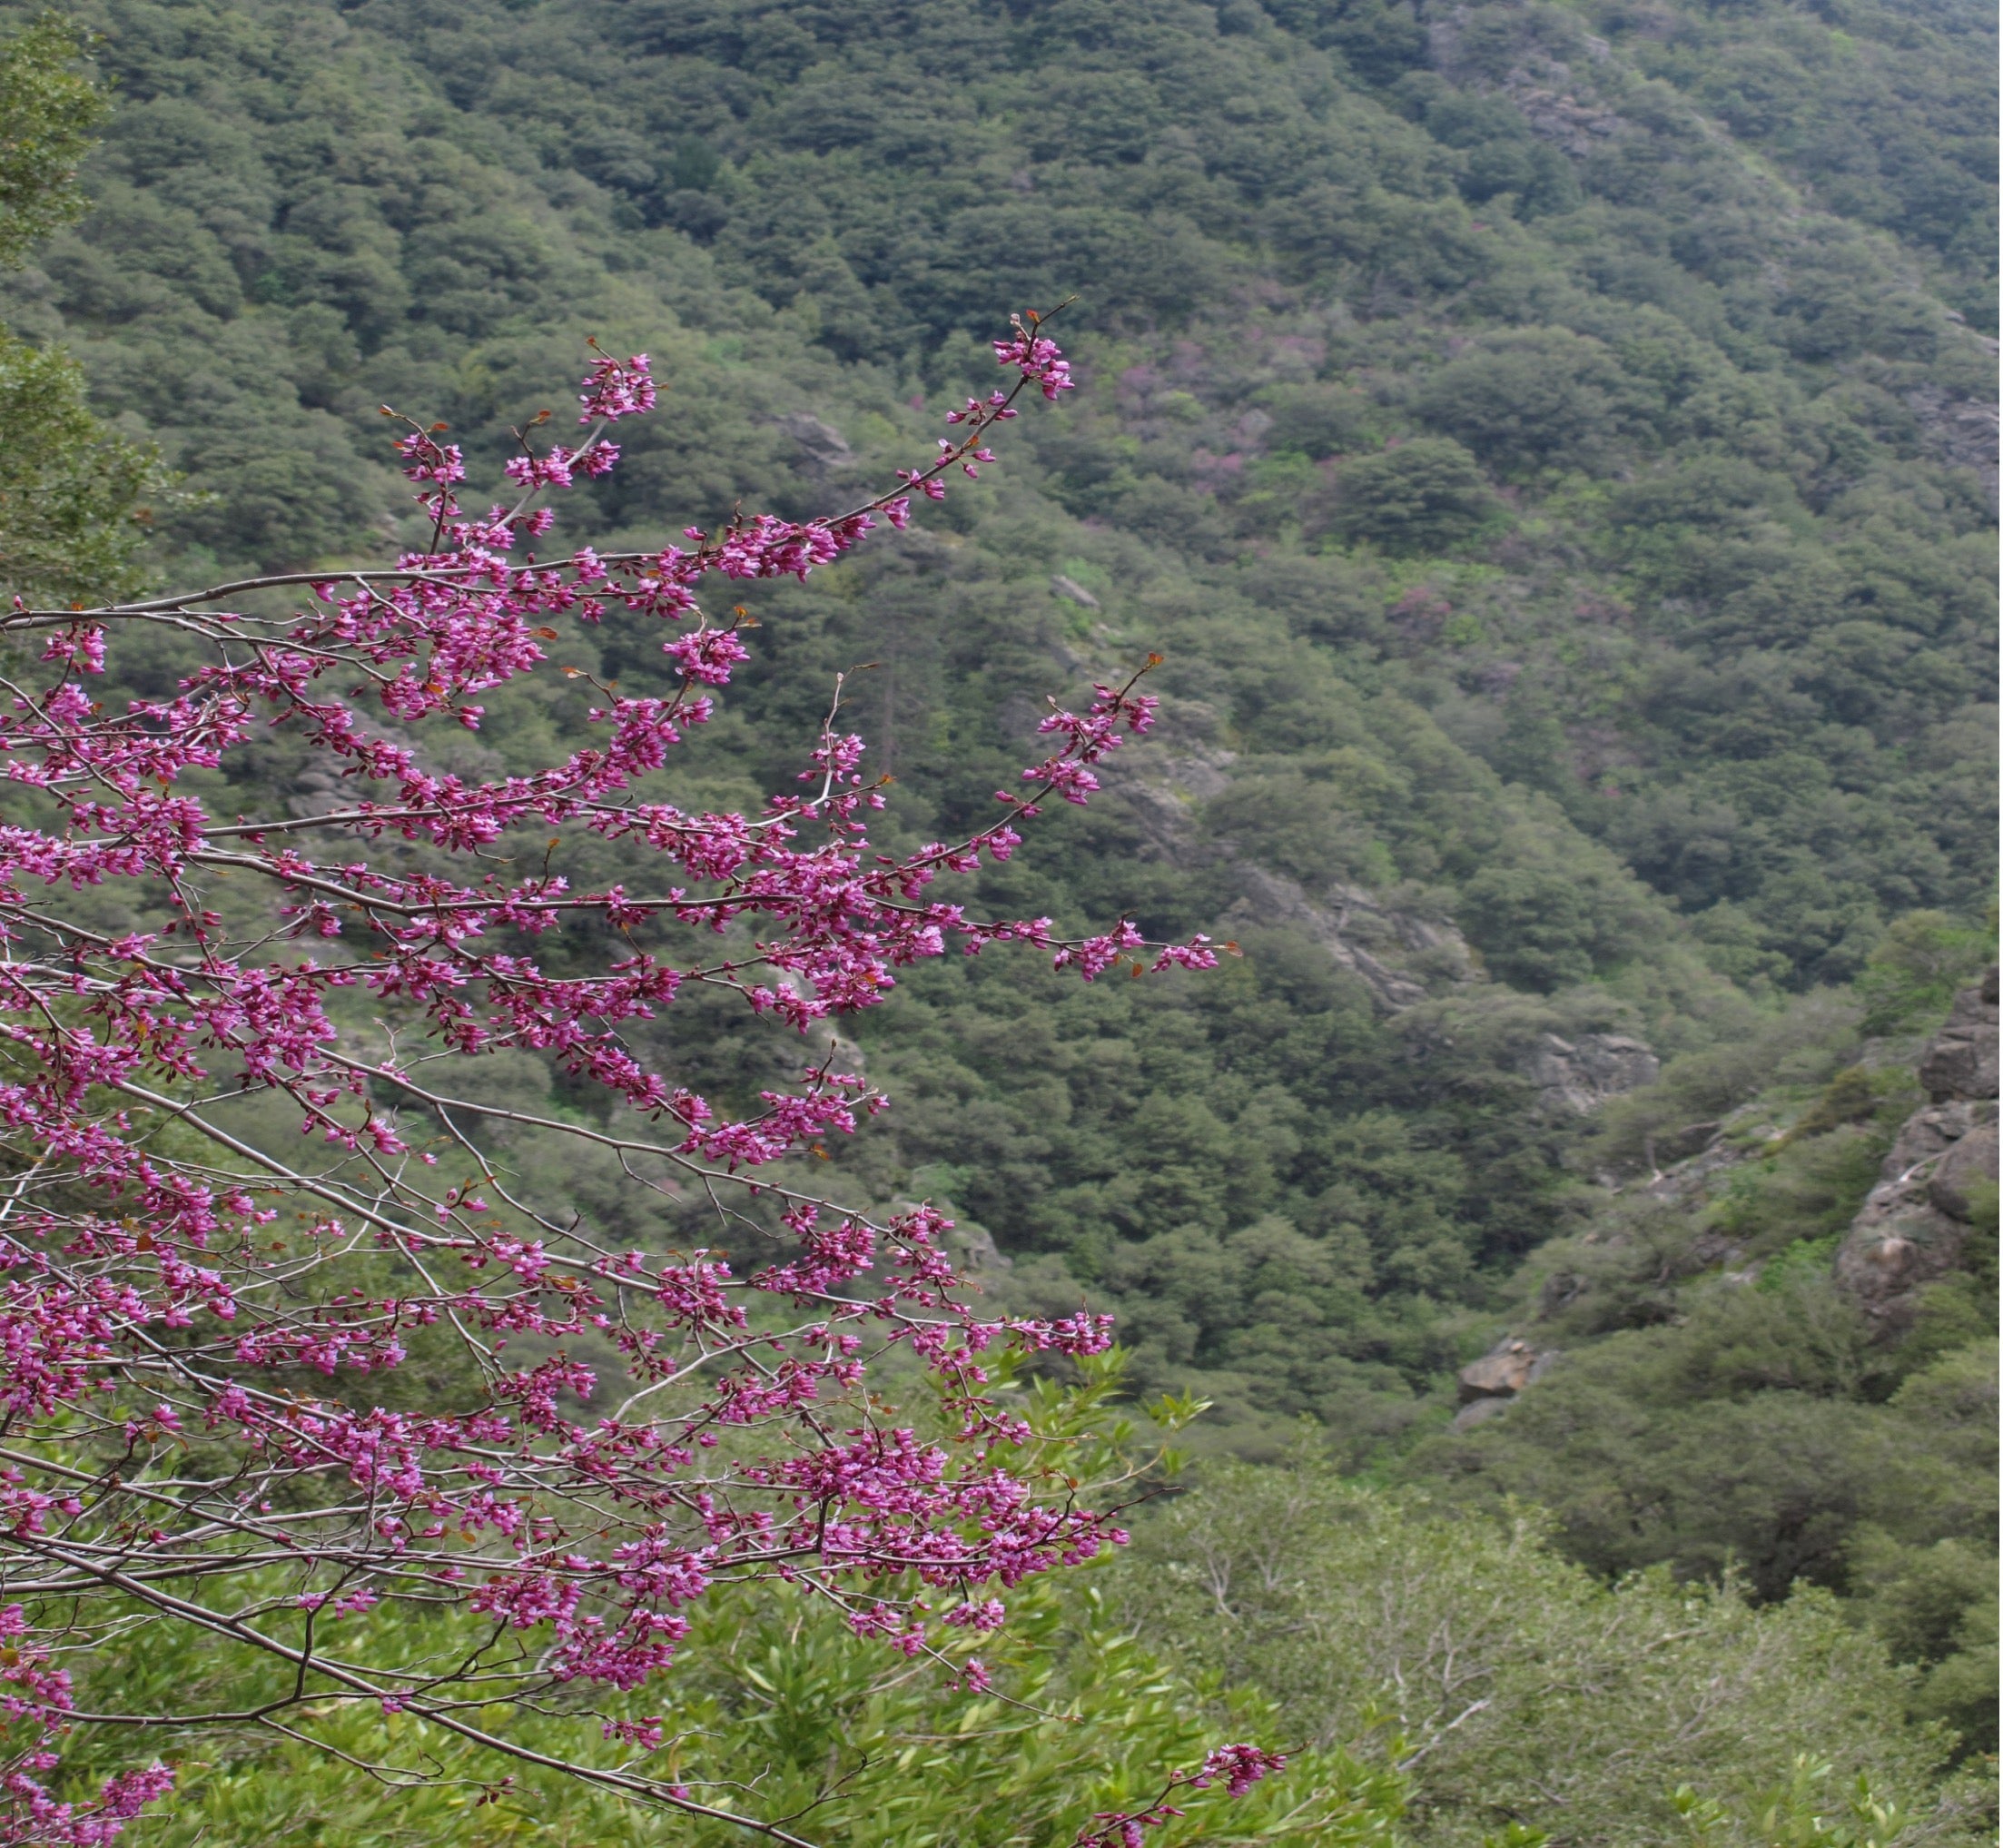 redbud blooms in foreground with green mountain slope in background